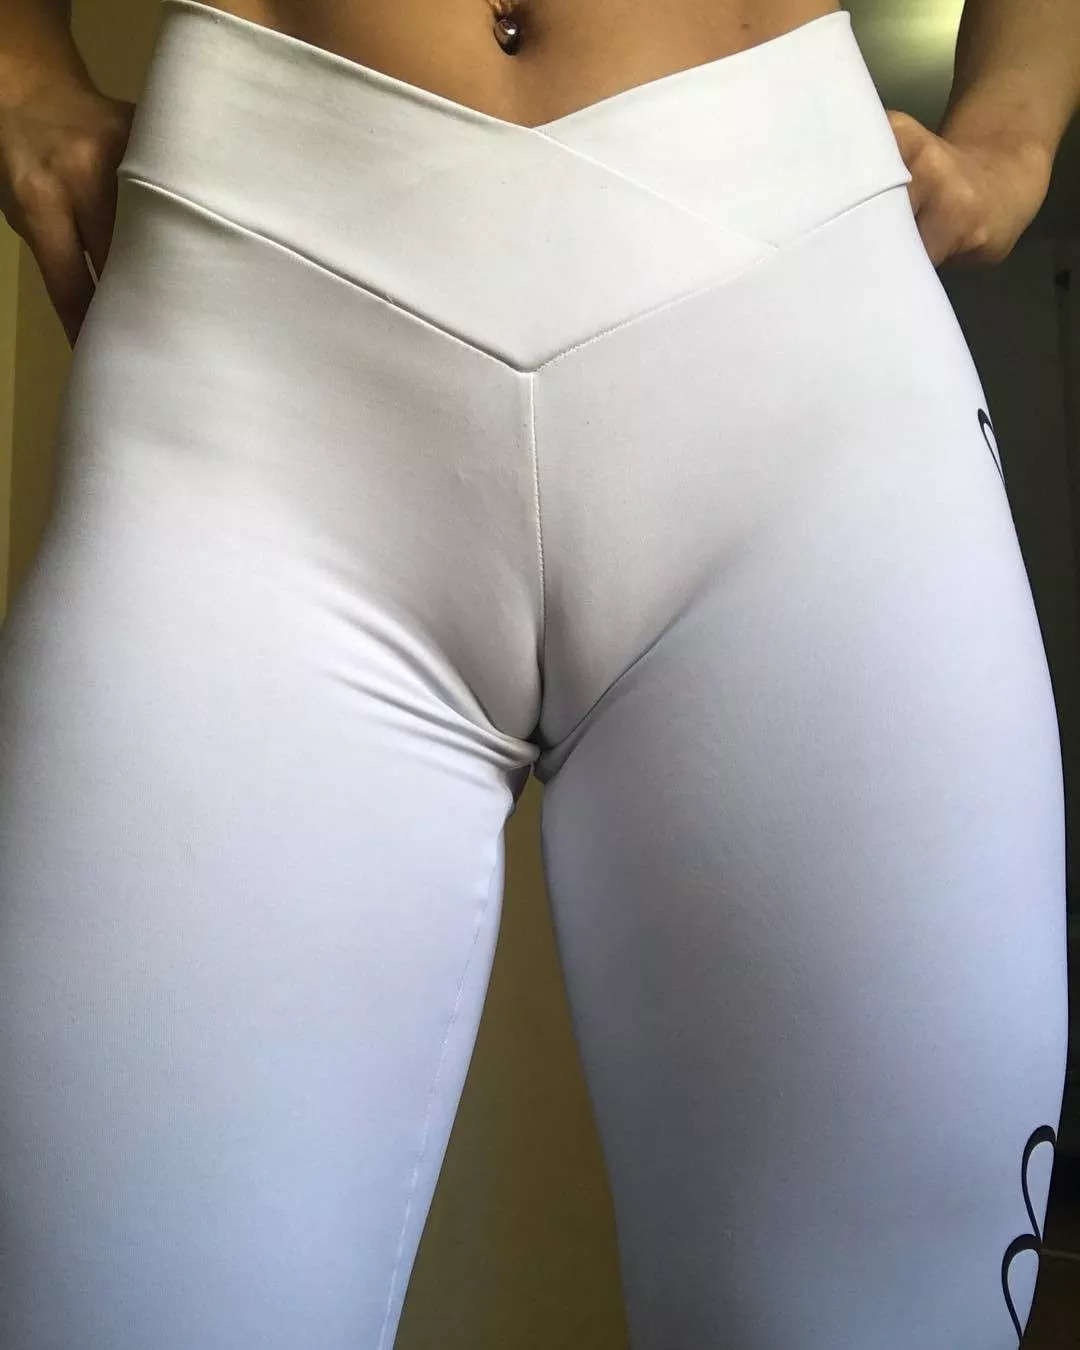  extreme closeup cameltoe in white yoga pants Babes Pics Galleries